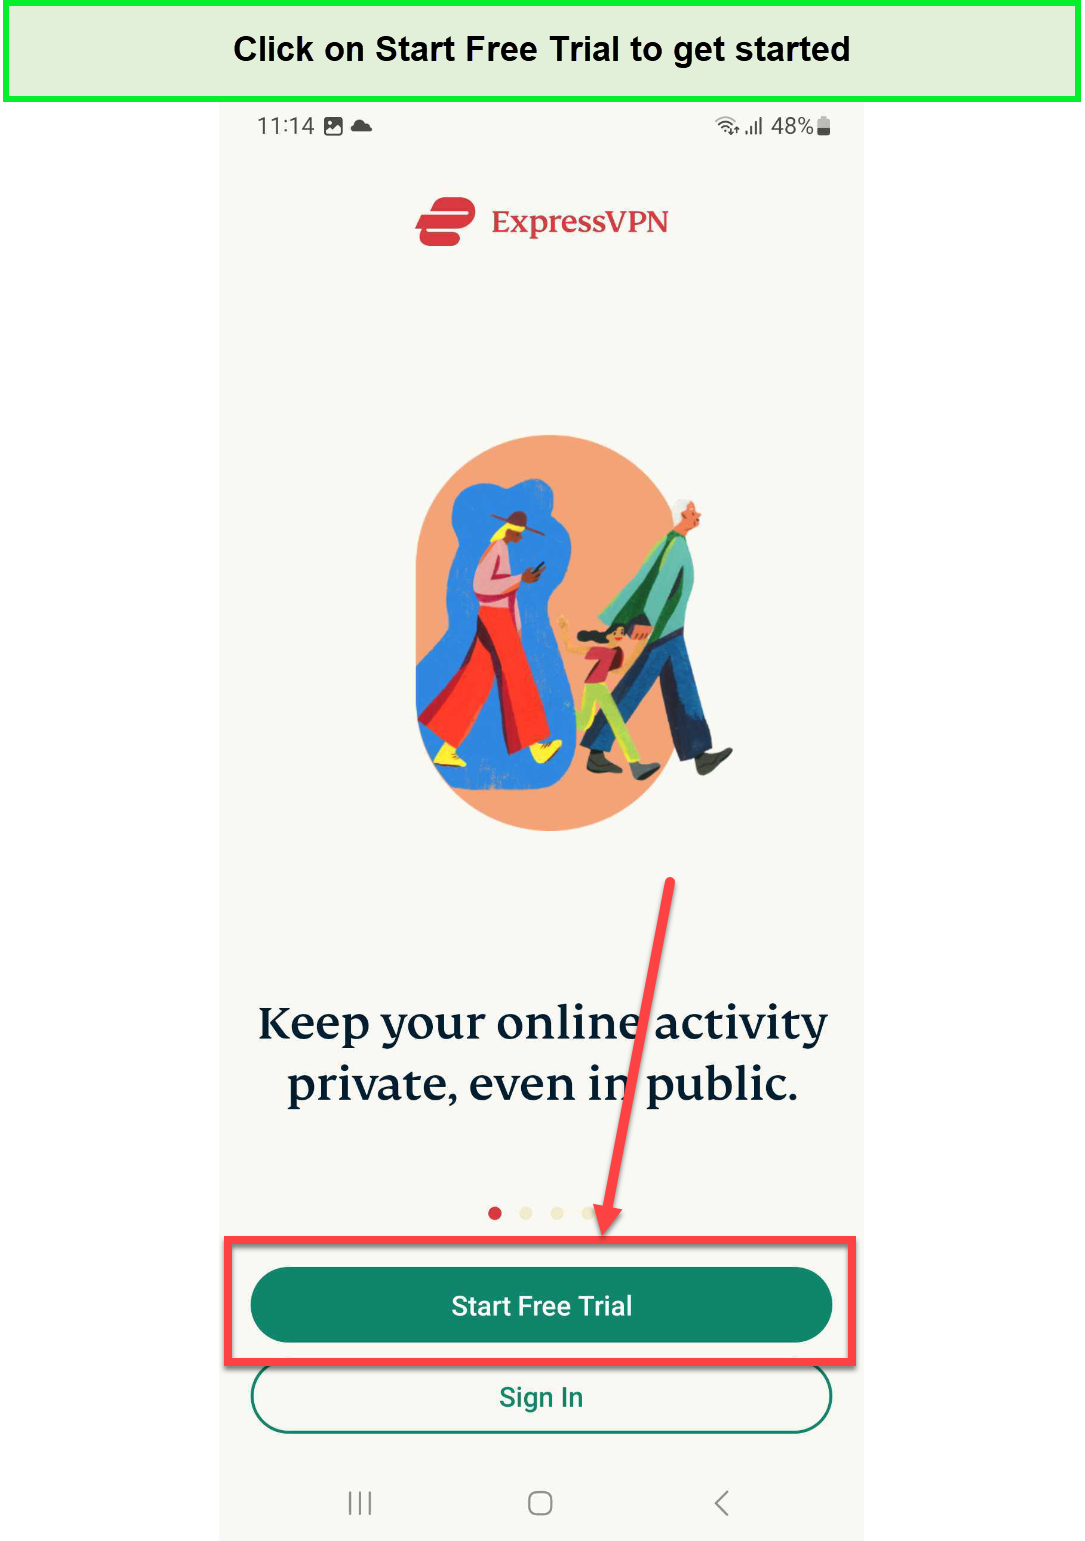 download-expressvpn-android-app-free-trial-2-in-India